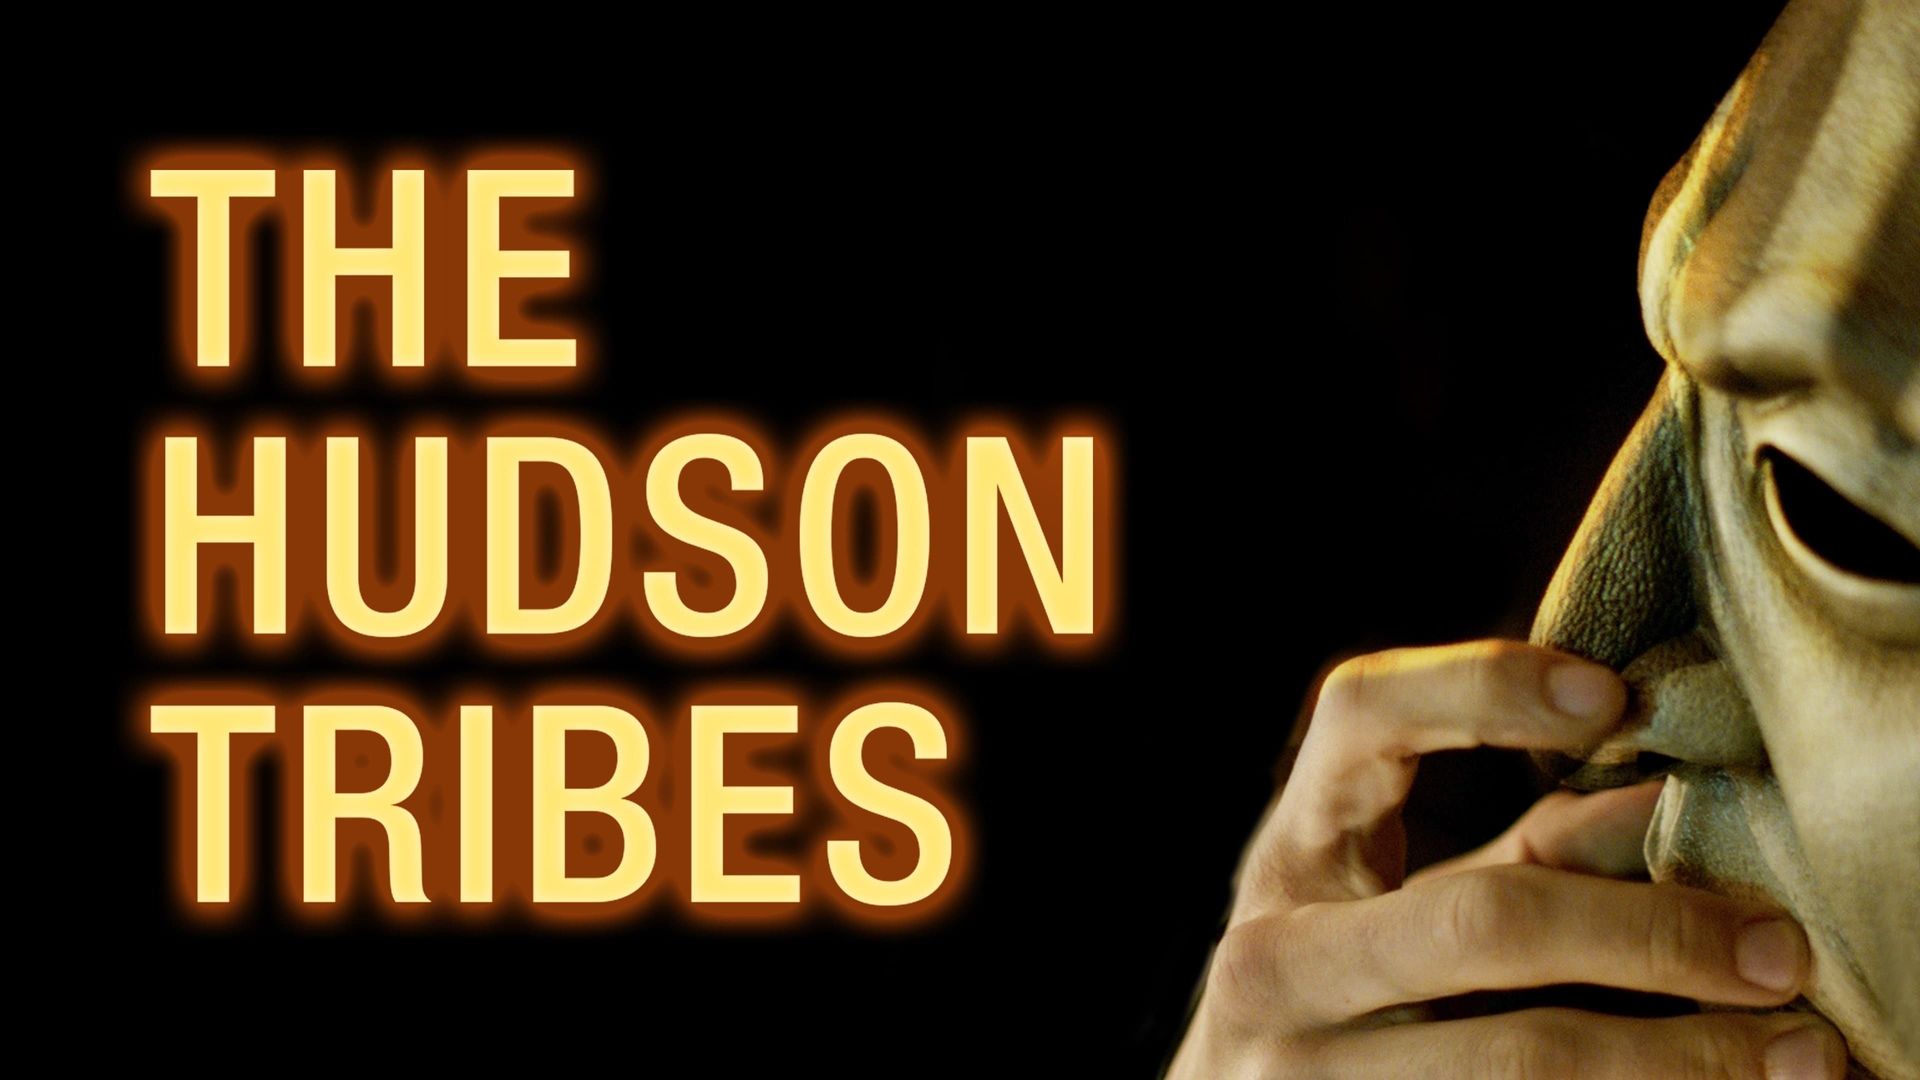 The Hudson Tribes background